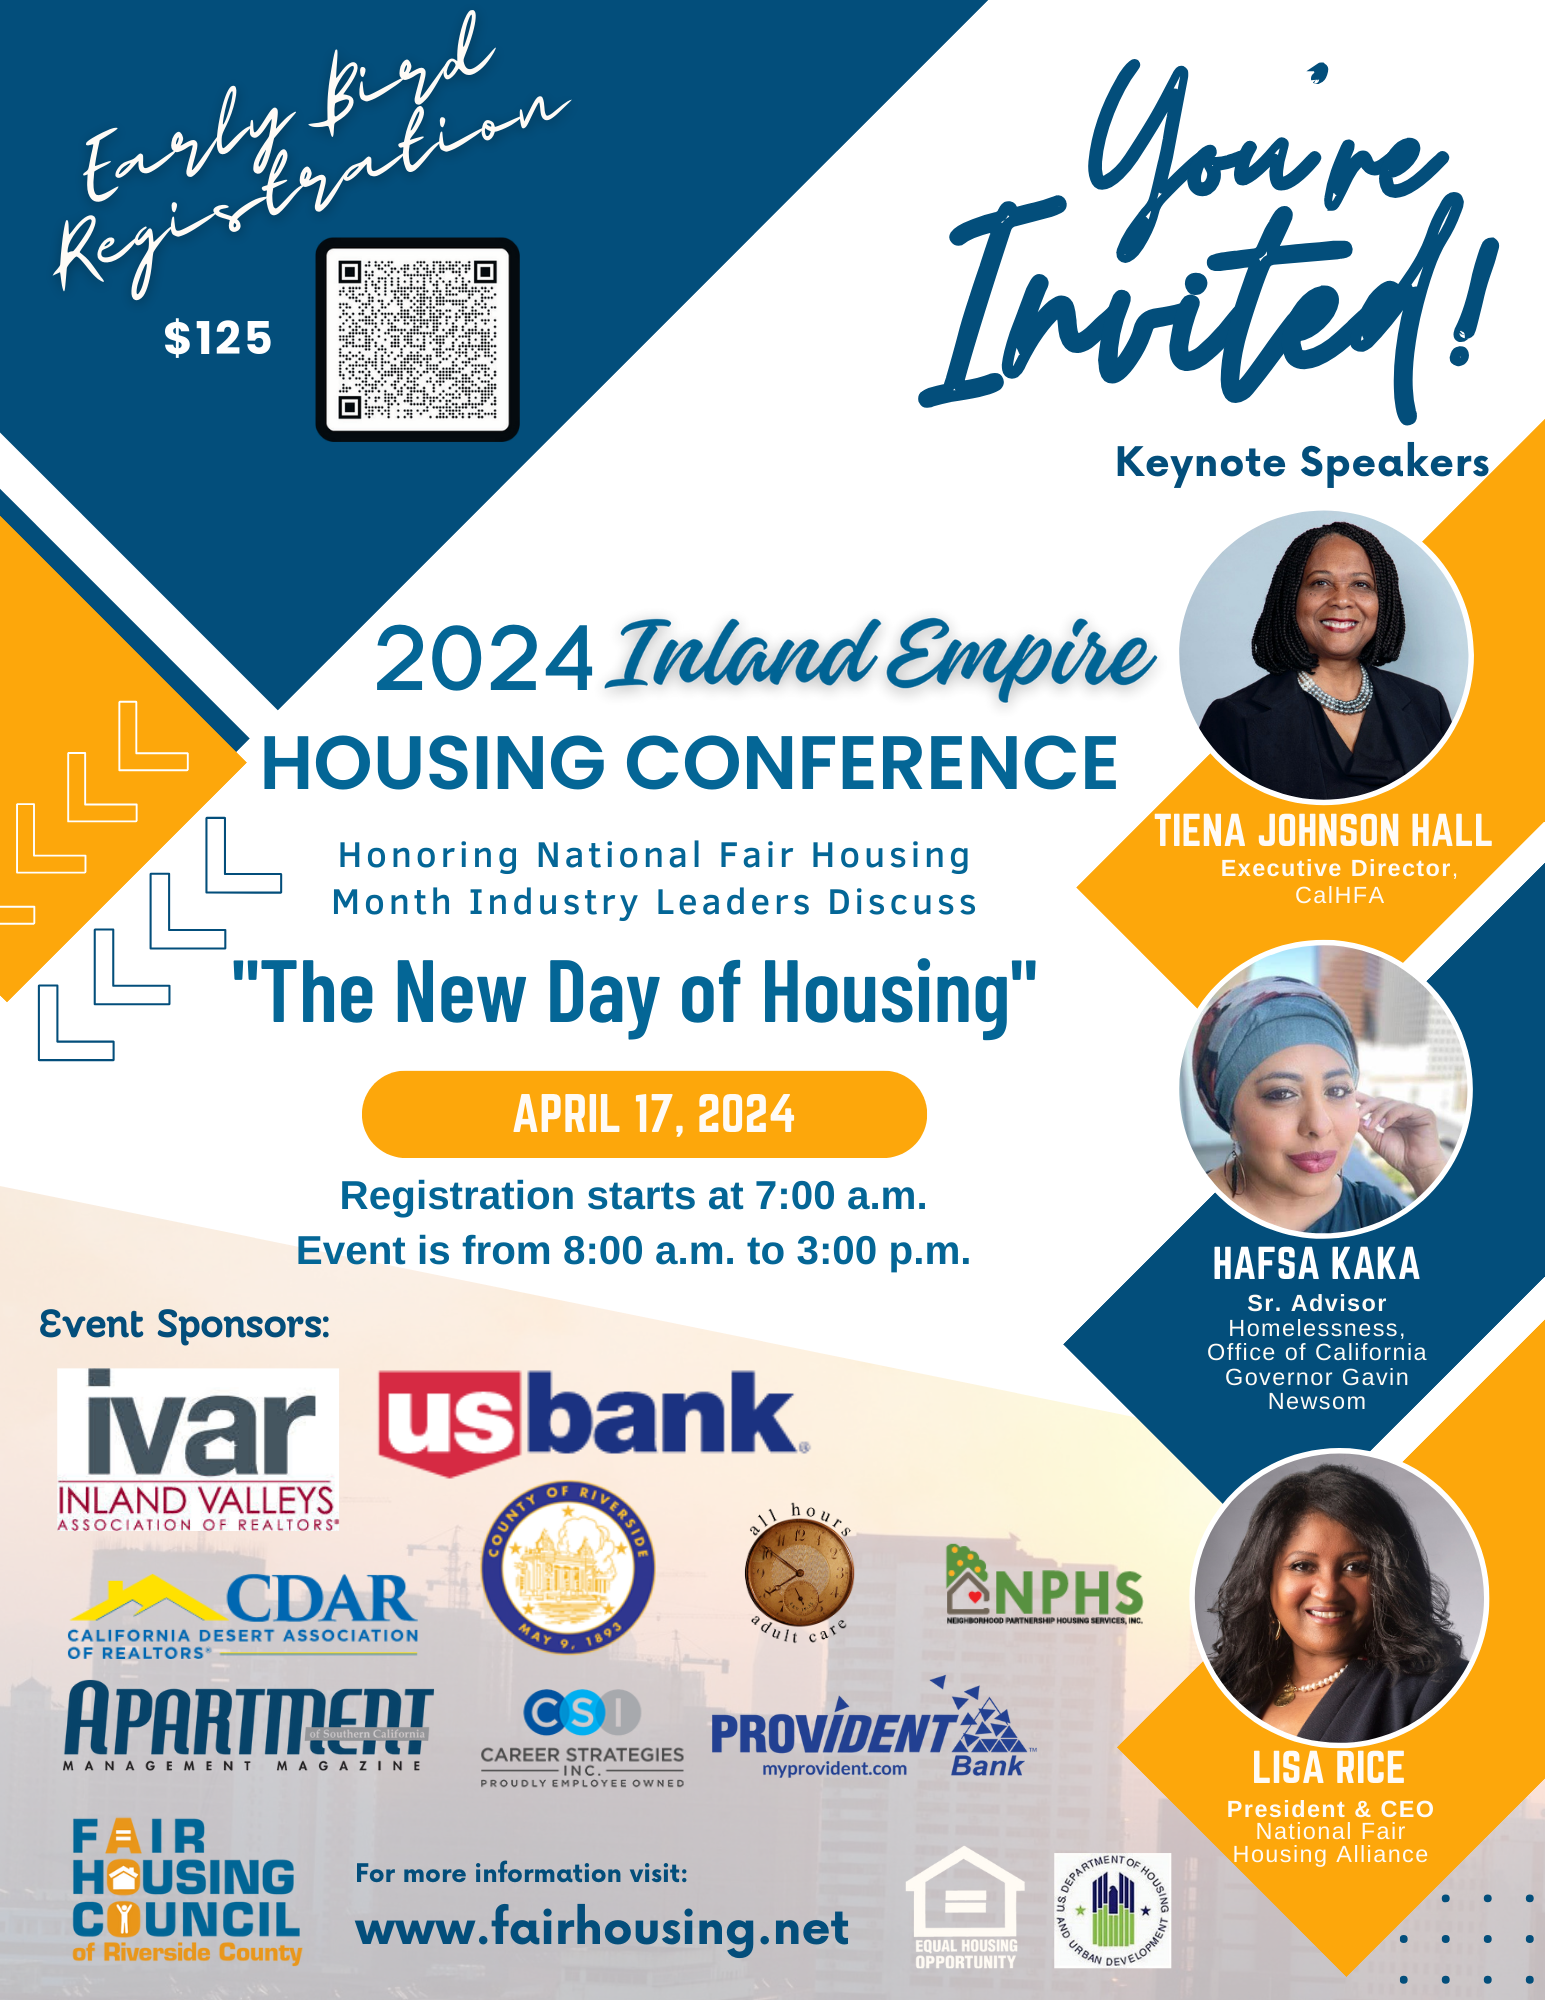 2023 Housing Conference